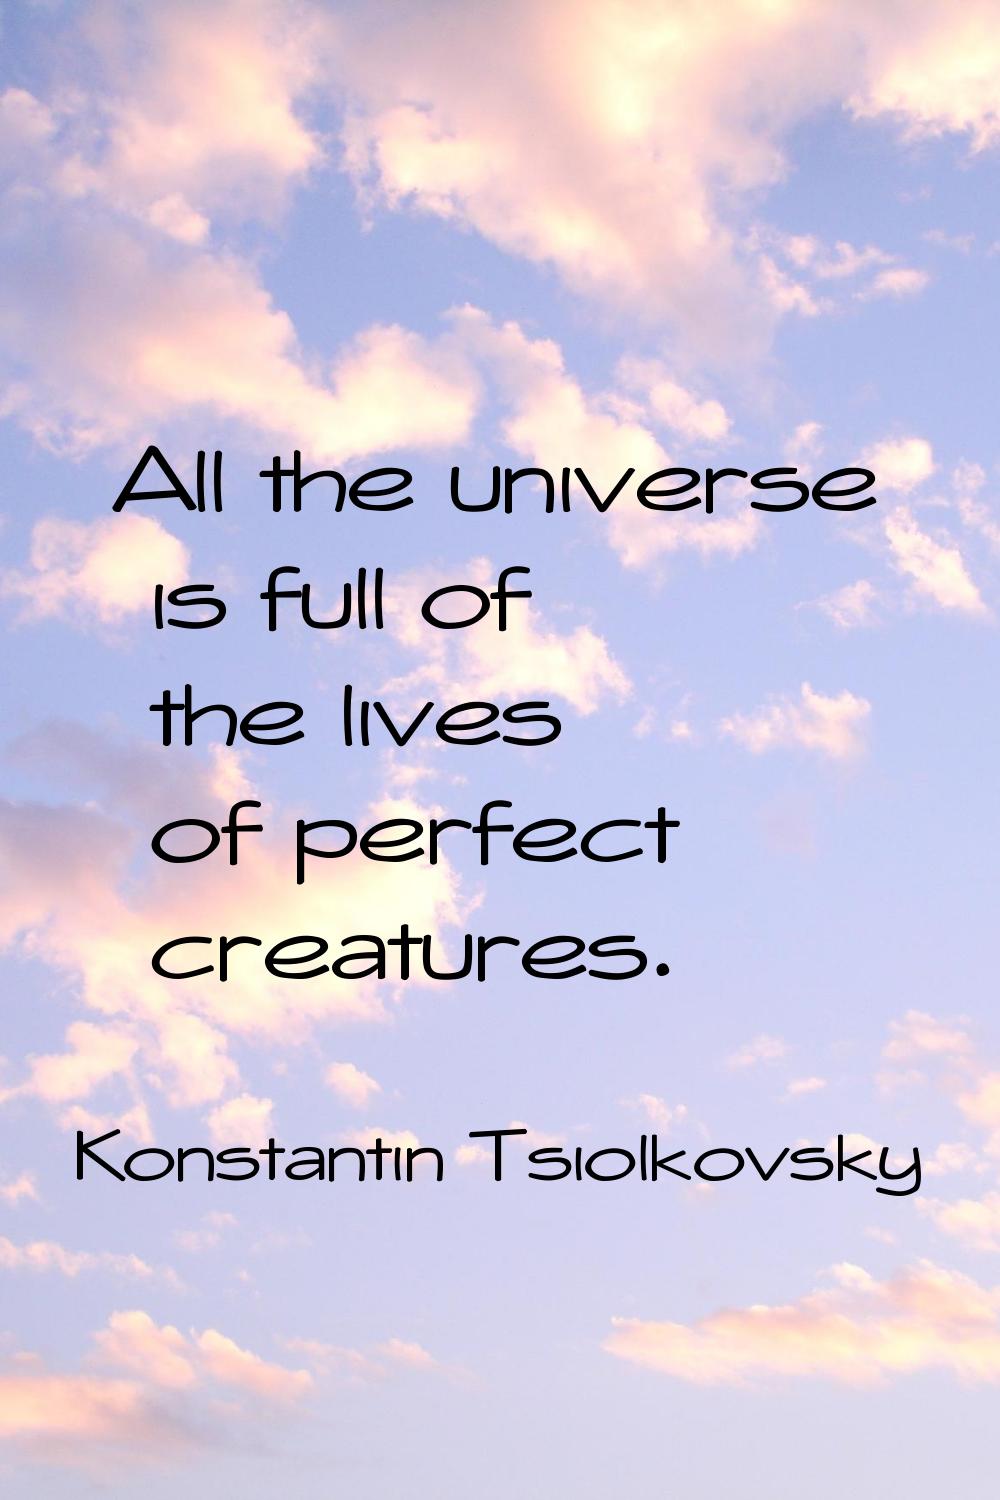 All the universe is full of the lives of perfect creatures.